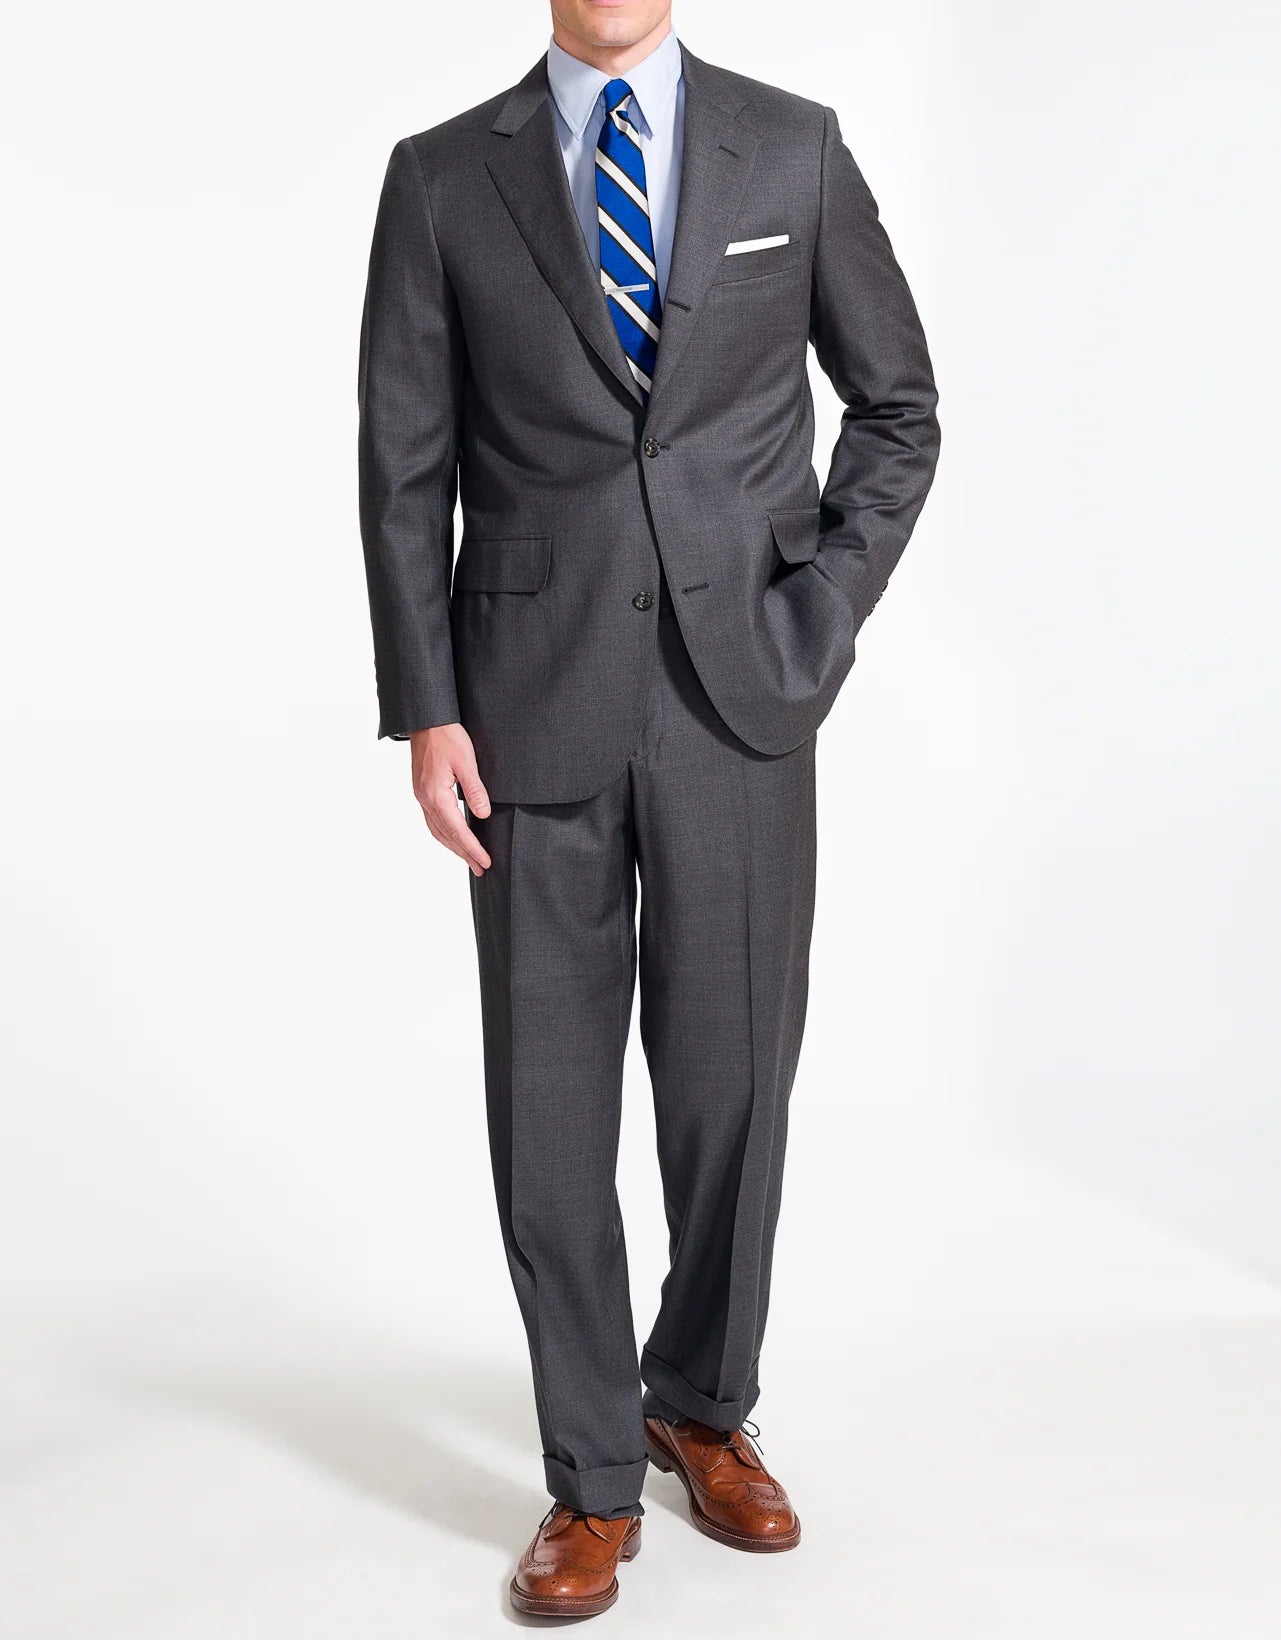 Suits - Solid Charcoal Grey